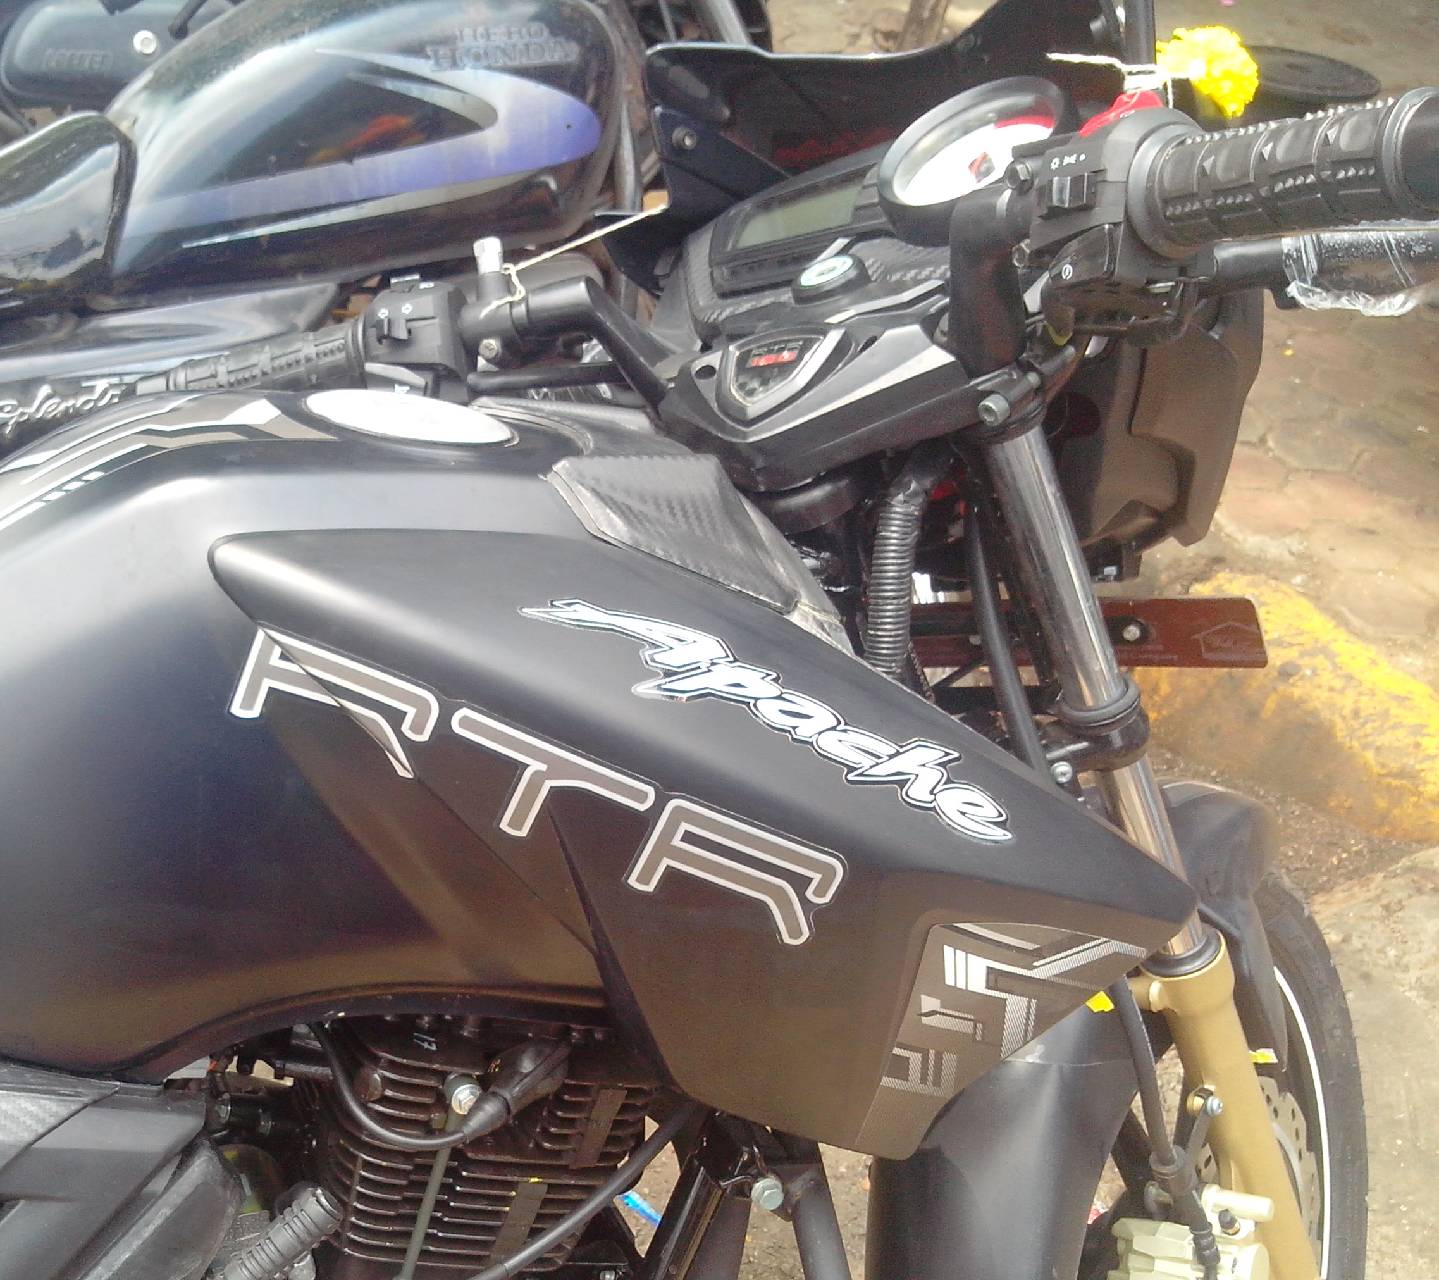 Apache Rtr 180 Wallpapers Black Colour - Motorcycle , HD Wallpaper & Backgrounds